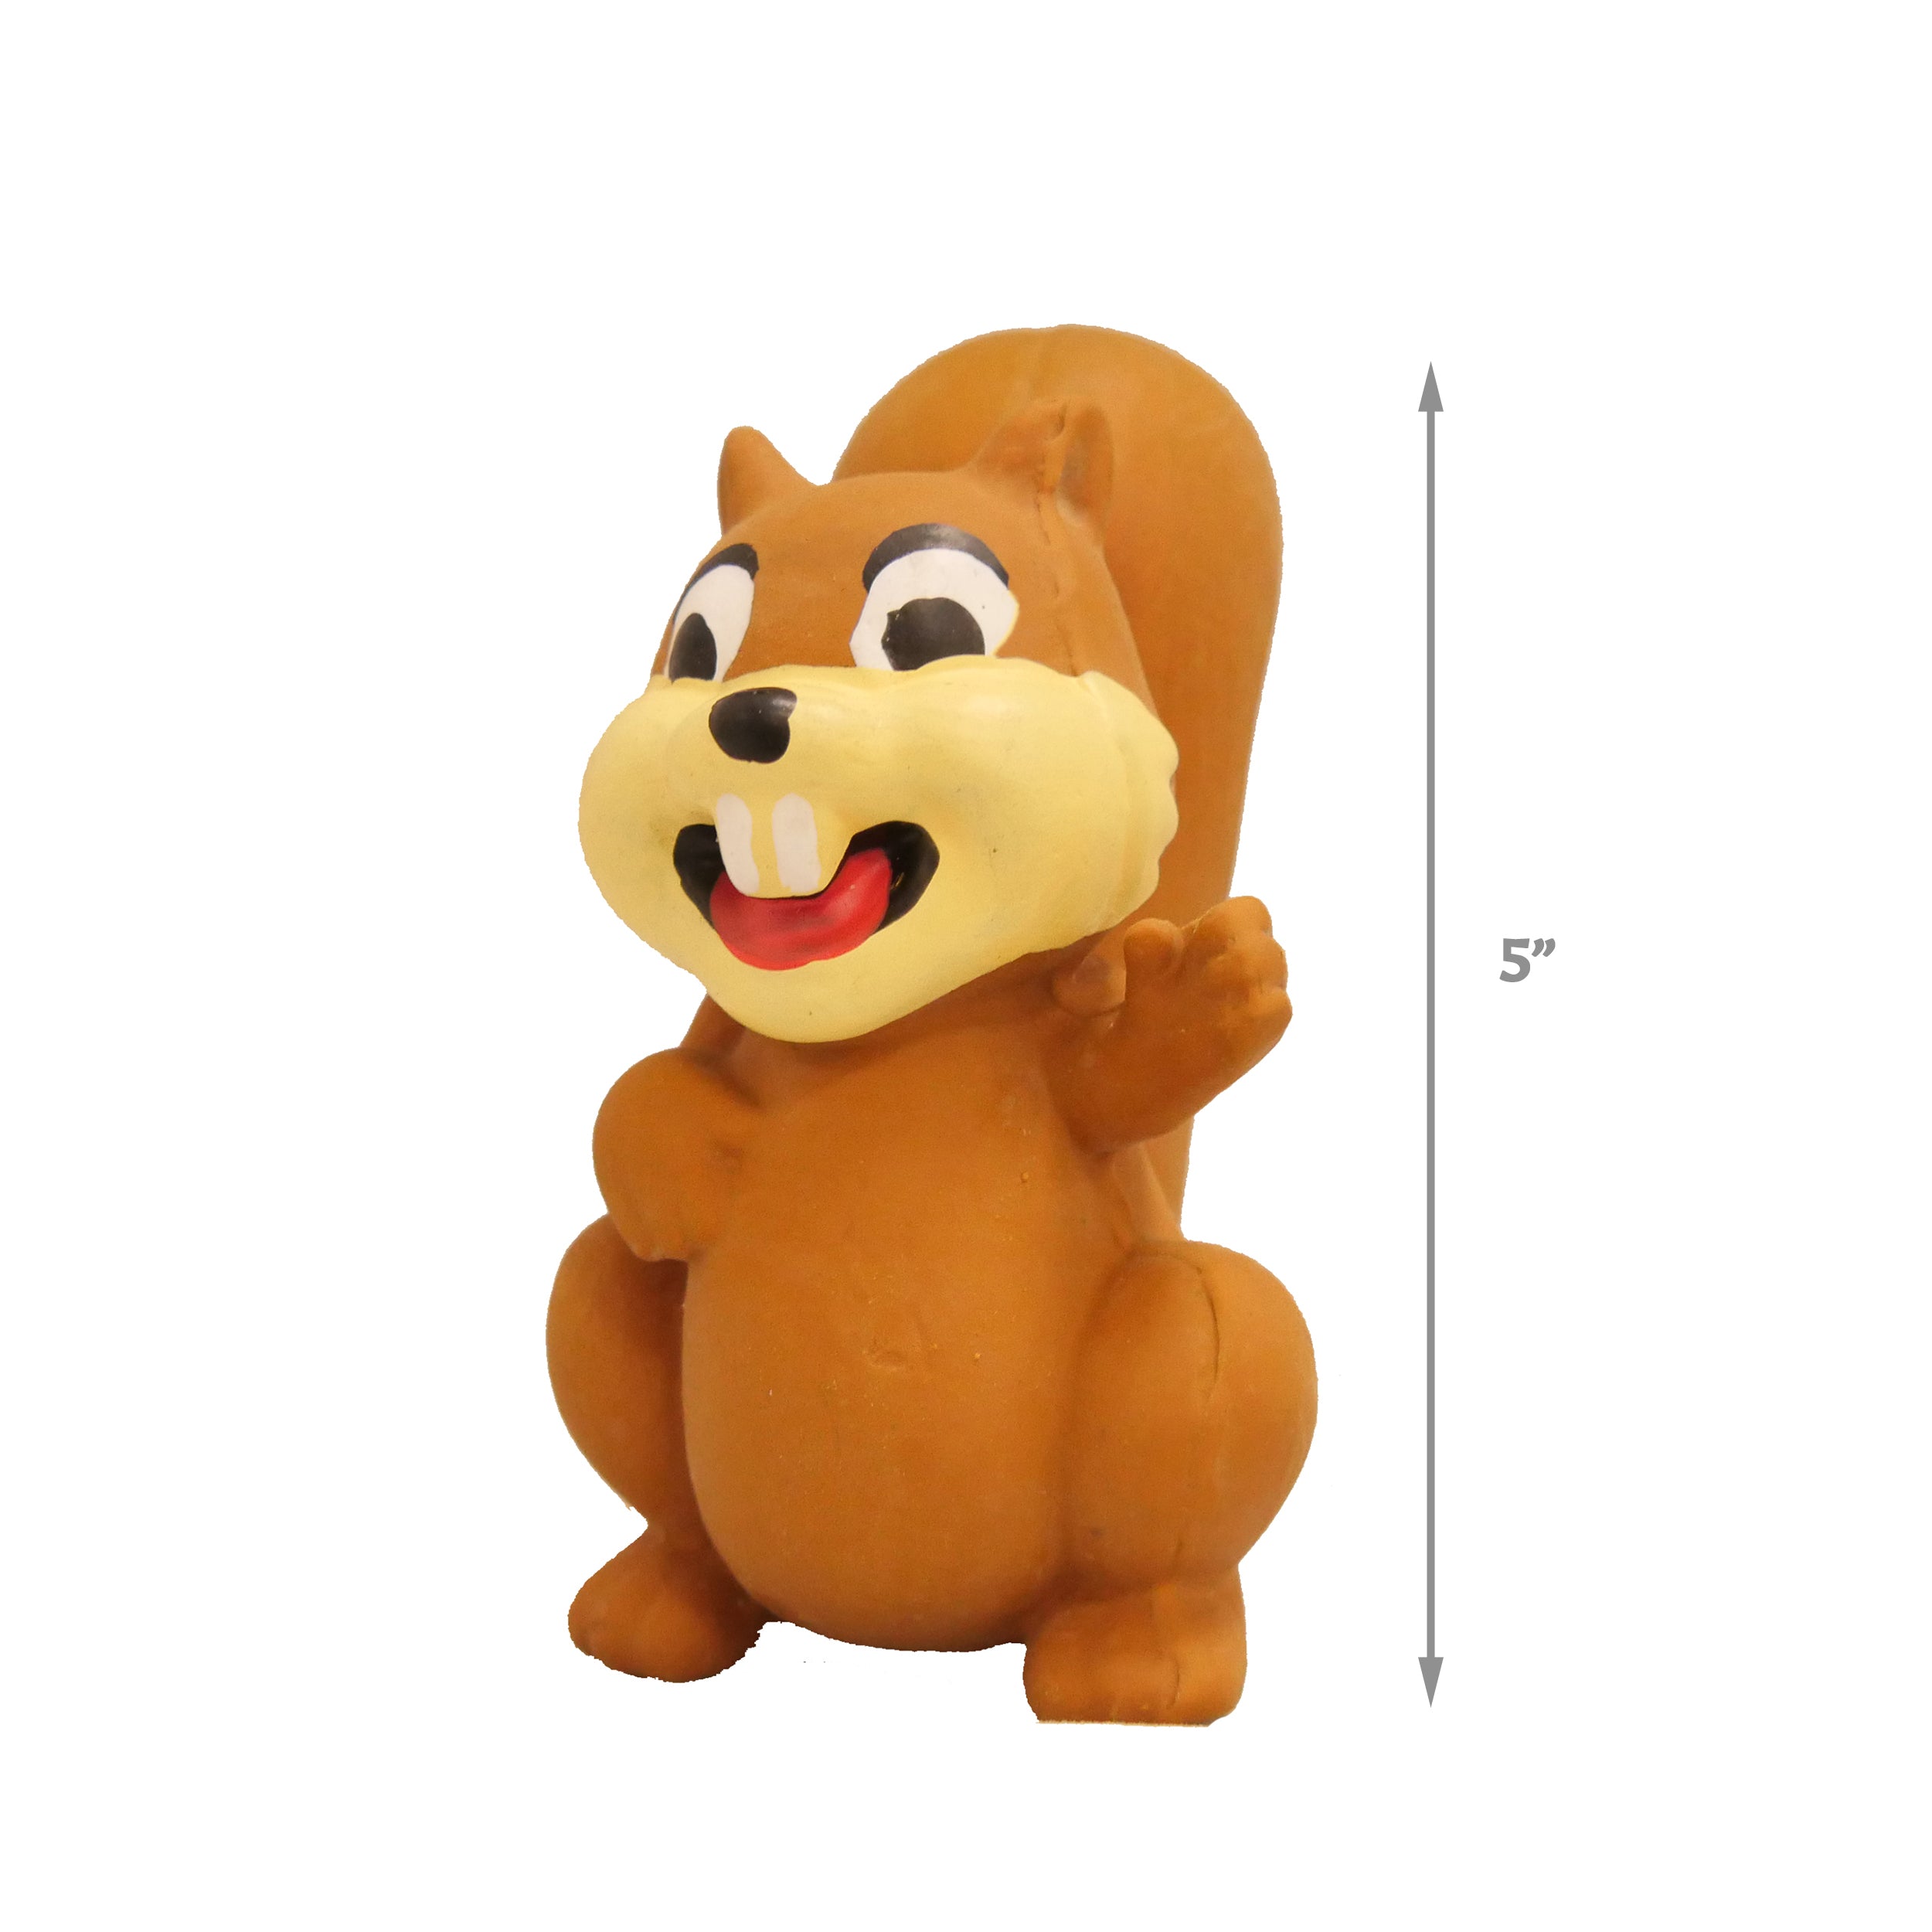 [Dog toy] cute brown rubber squirrel